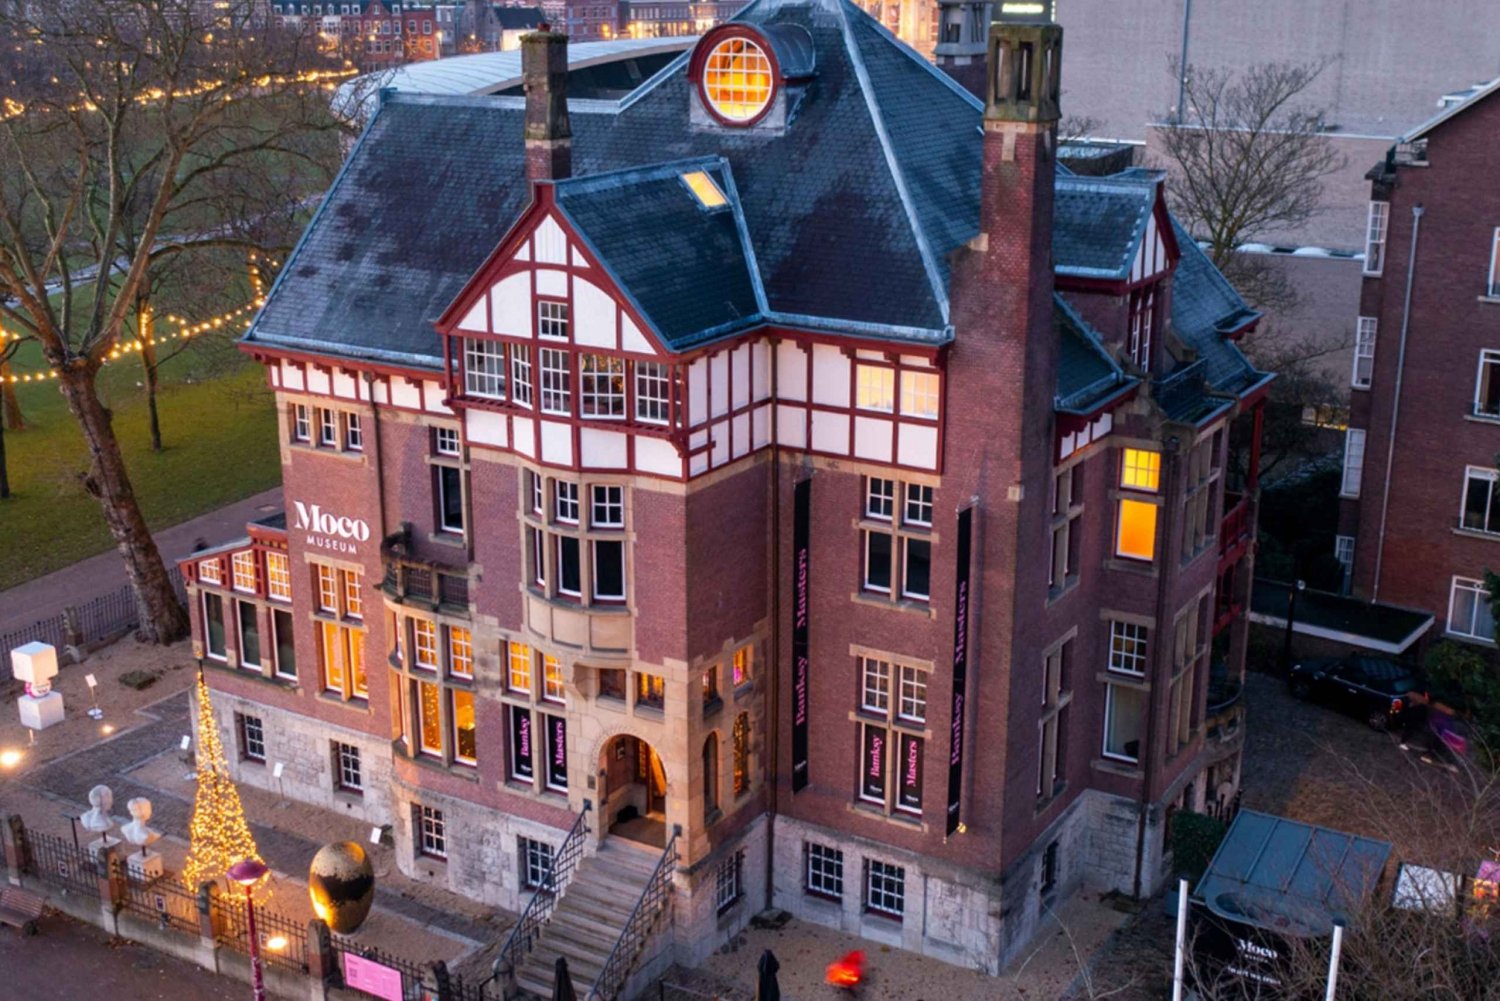 Amsterdam : Moco Museum & Nightclubs Admission Combo w/ Taxi